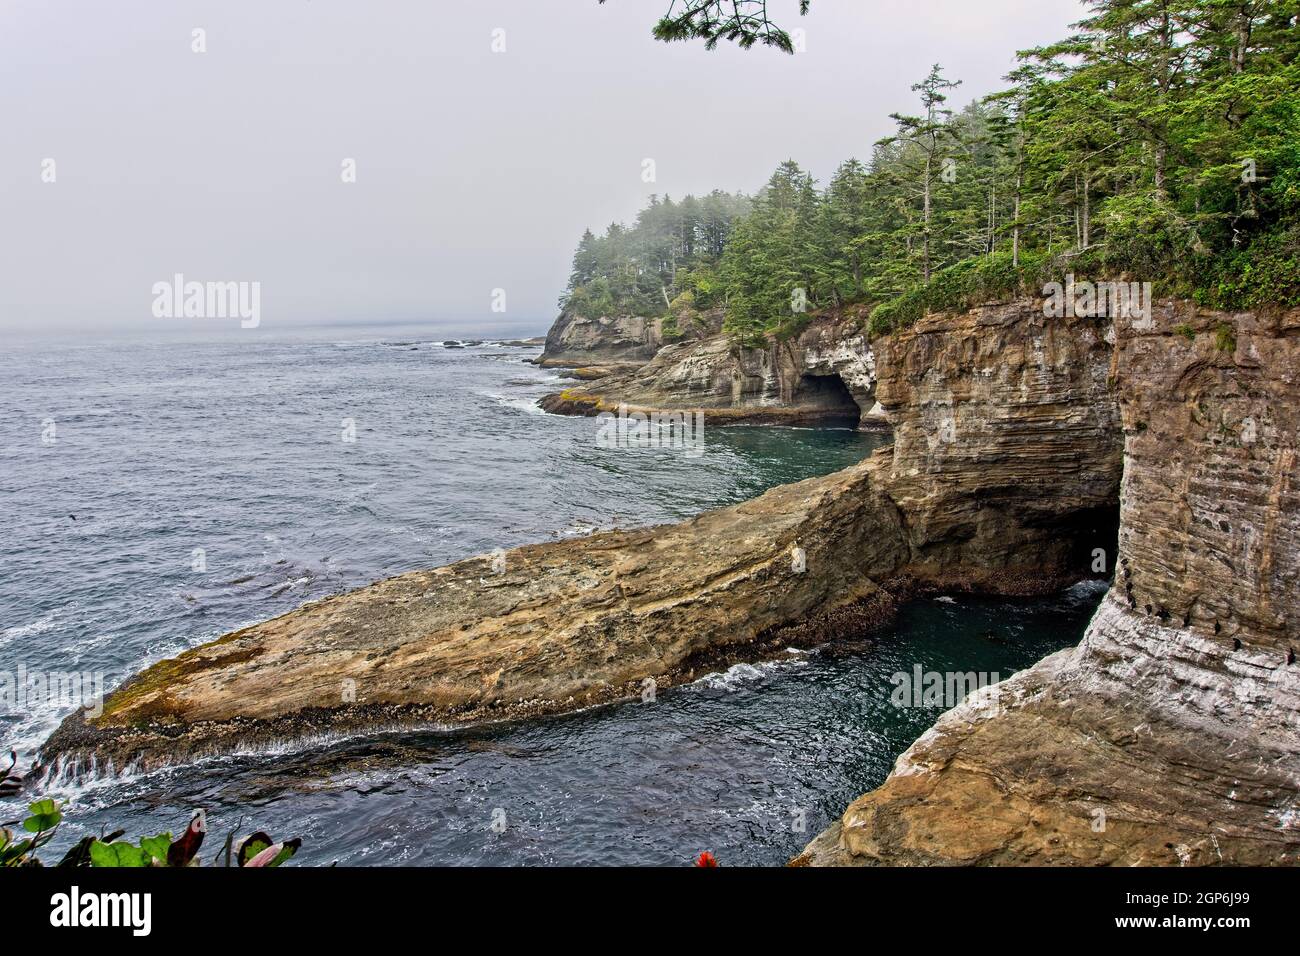 Cape Flattery Promontory - A rock promontory jutting into the Pacific at Cape Flattery. Stock Photo